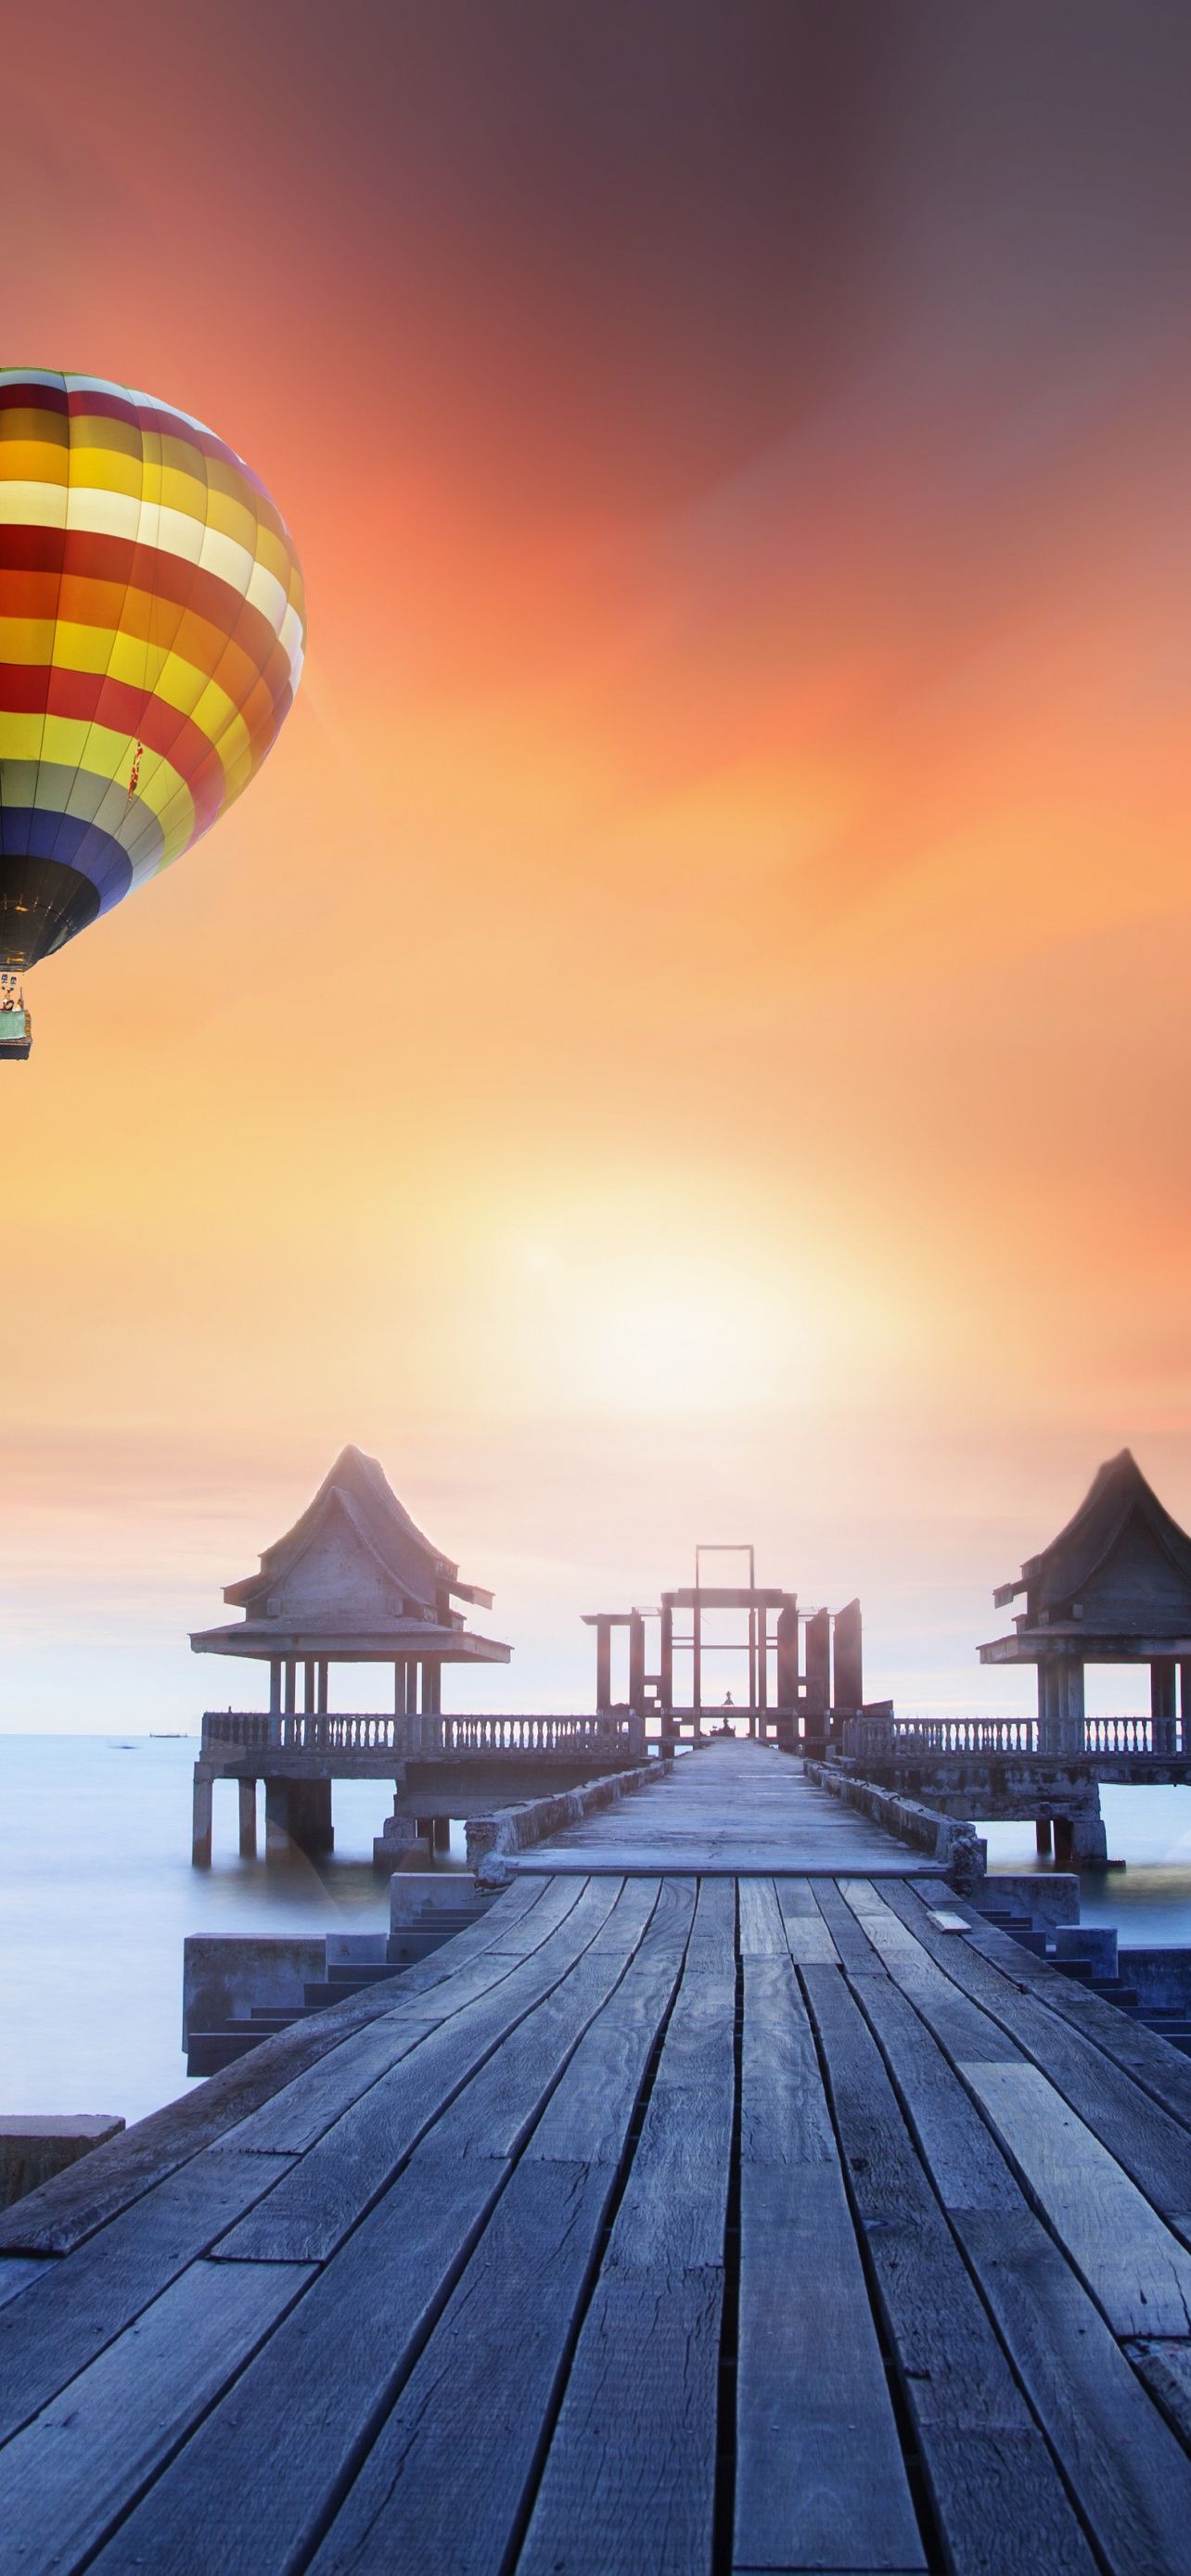 A colorful hot air balloon flying over a wooden pier - Hot air balloons